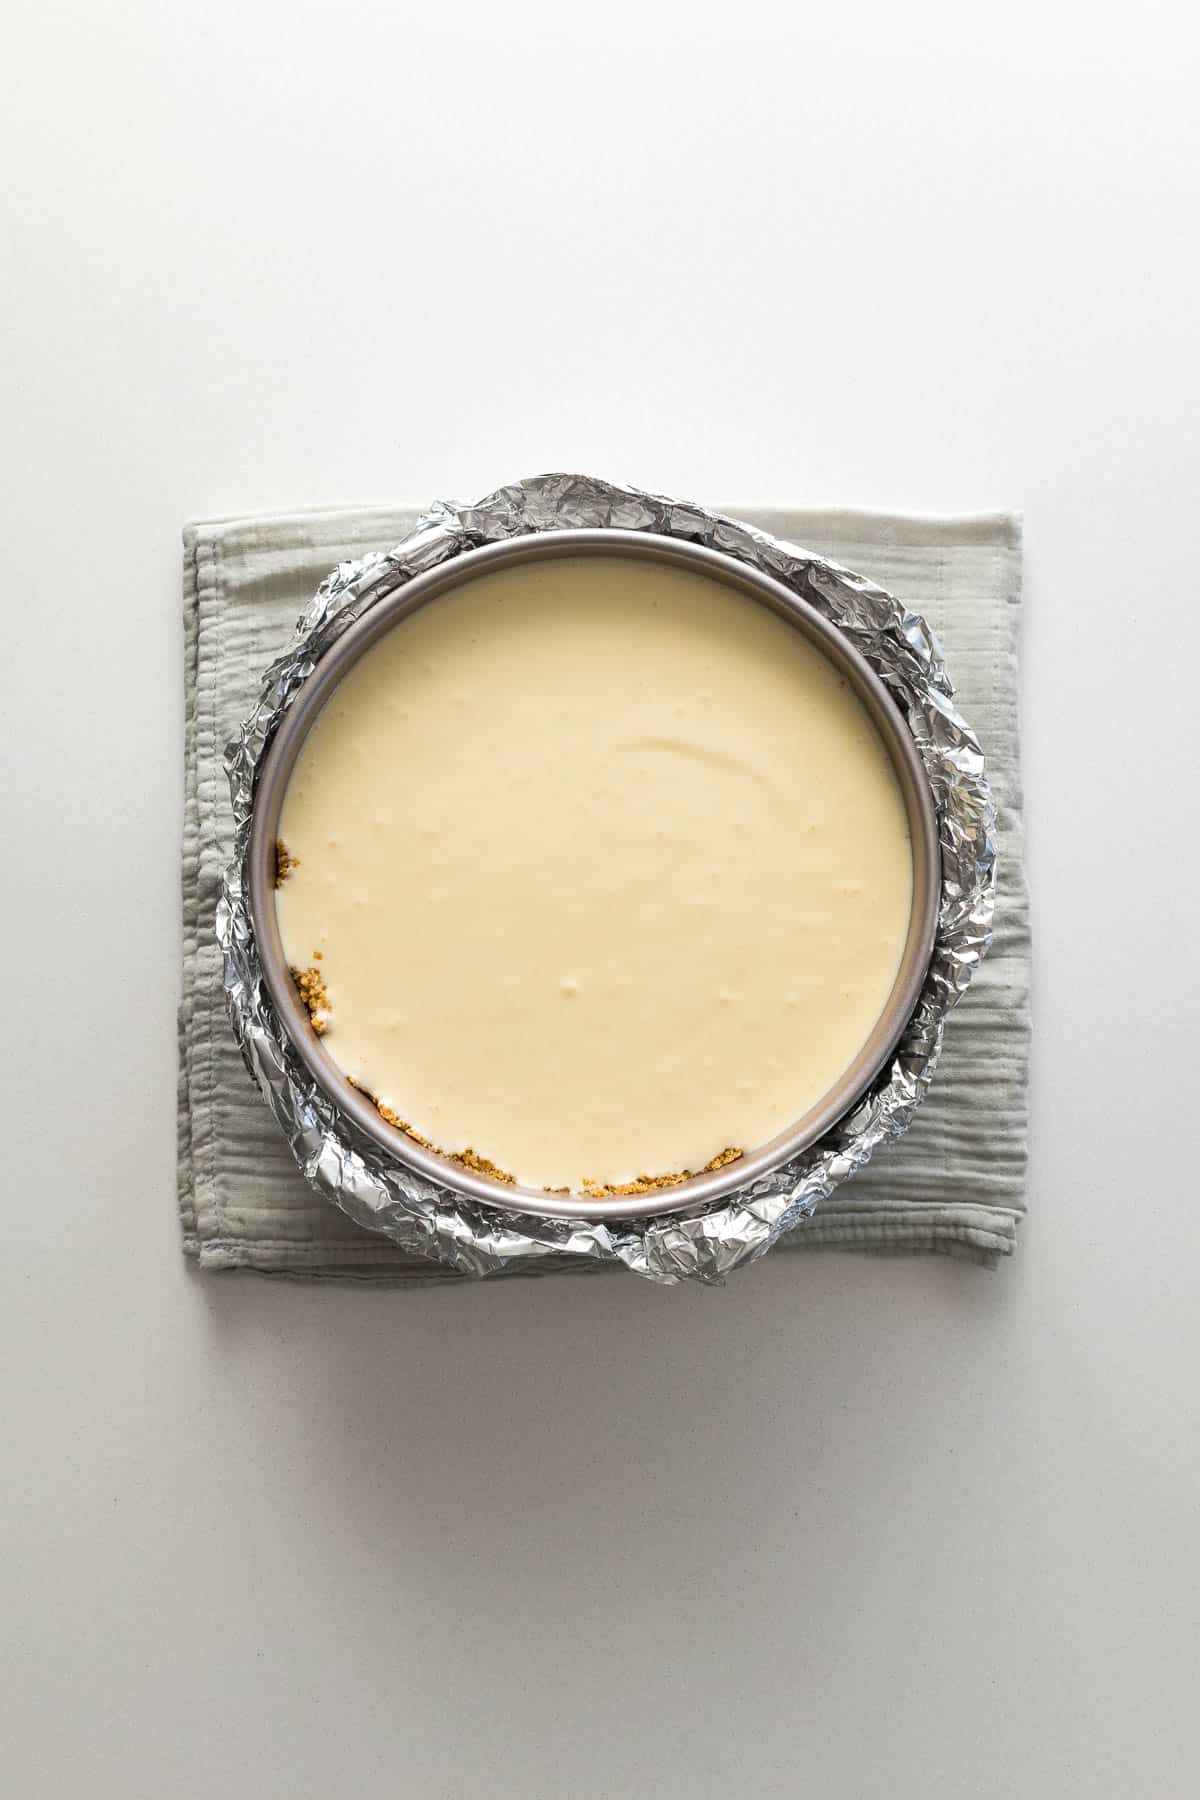 Step 10 - Cheesecake batter poured into the baked biscuit base, with the pan wrapped in foil.